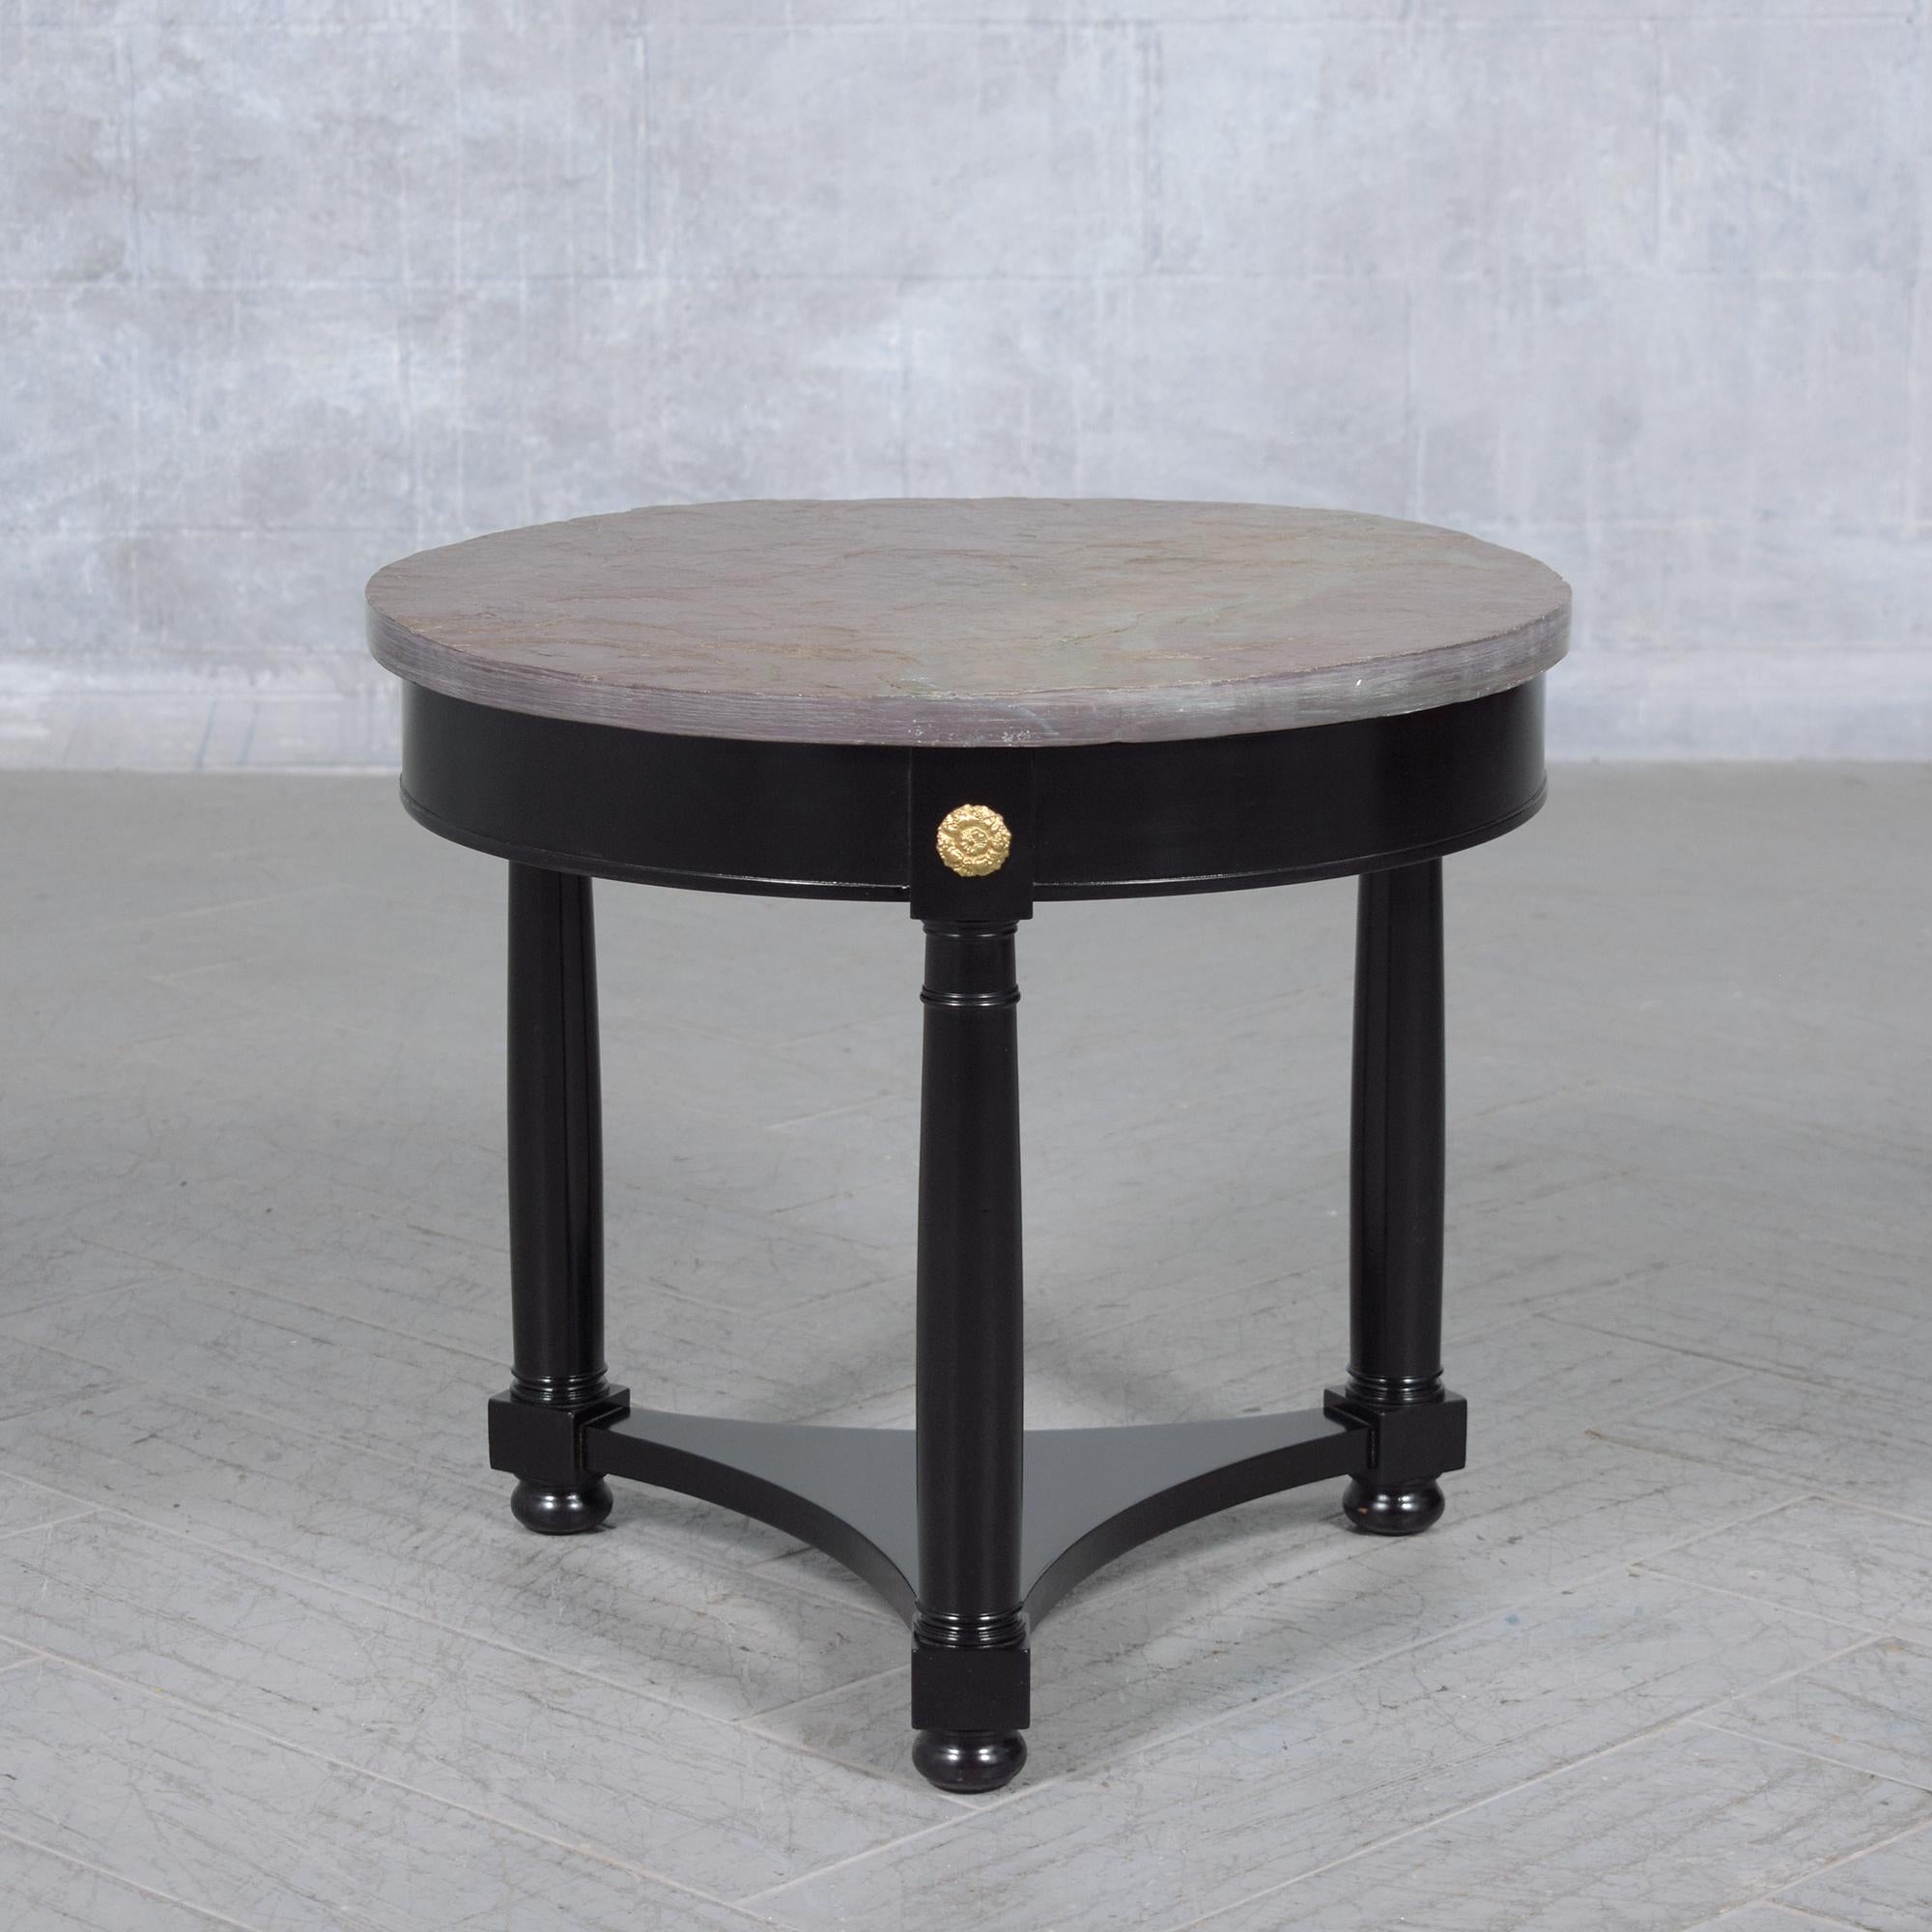 Immerse yourself in the timeless elegance of our vintage regency-style round side table, meticulously restored to showcase a perfect harmony of classic design and modern restoration. Crafted by our team of expert craftsmen, this table now stands as